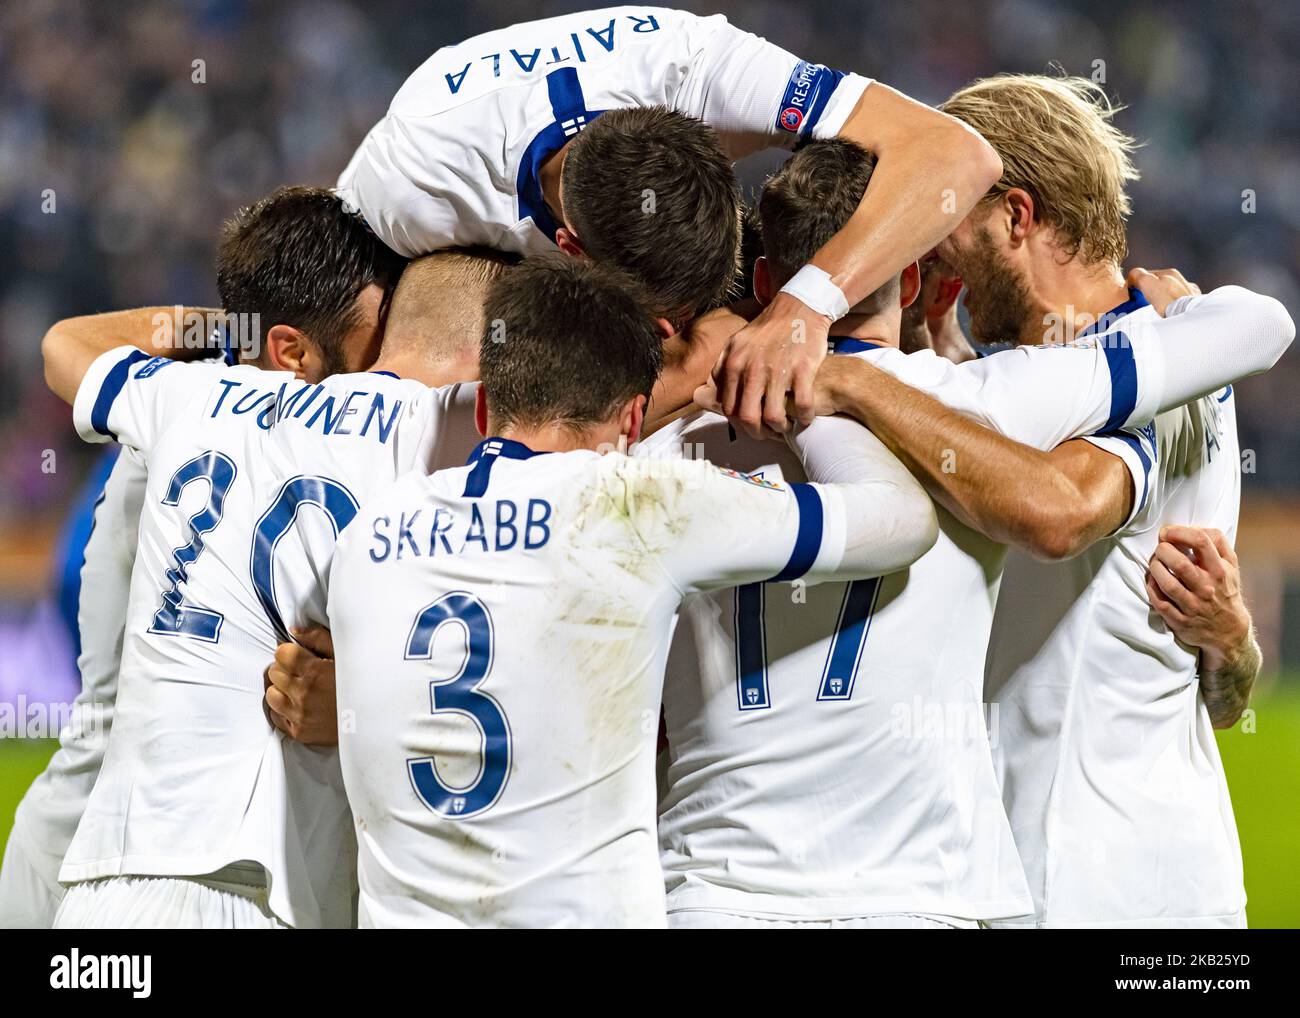 Finland's players celebrate a scoring during the UEFA Nations League group stage football match Finland v Grece in Tampere, Finland on October 15, 2018. (Photo by Antti Yrjonen/NurPhoto) Stock Photo